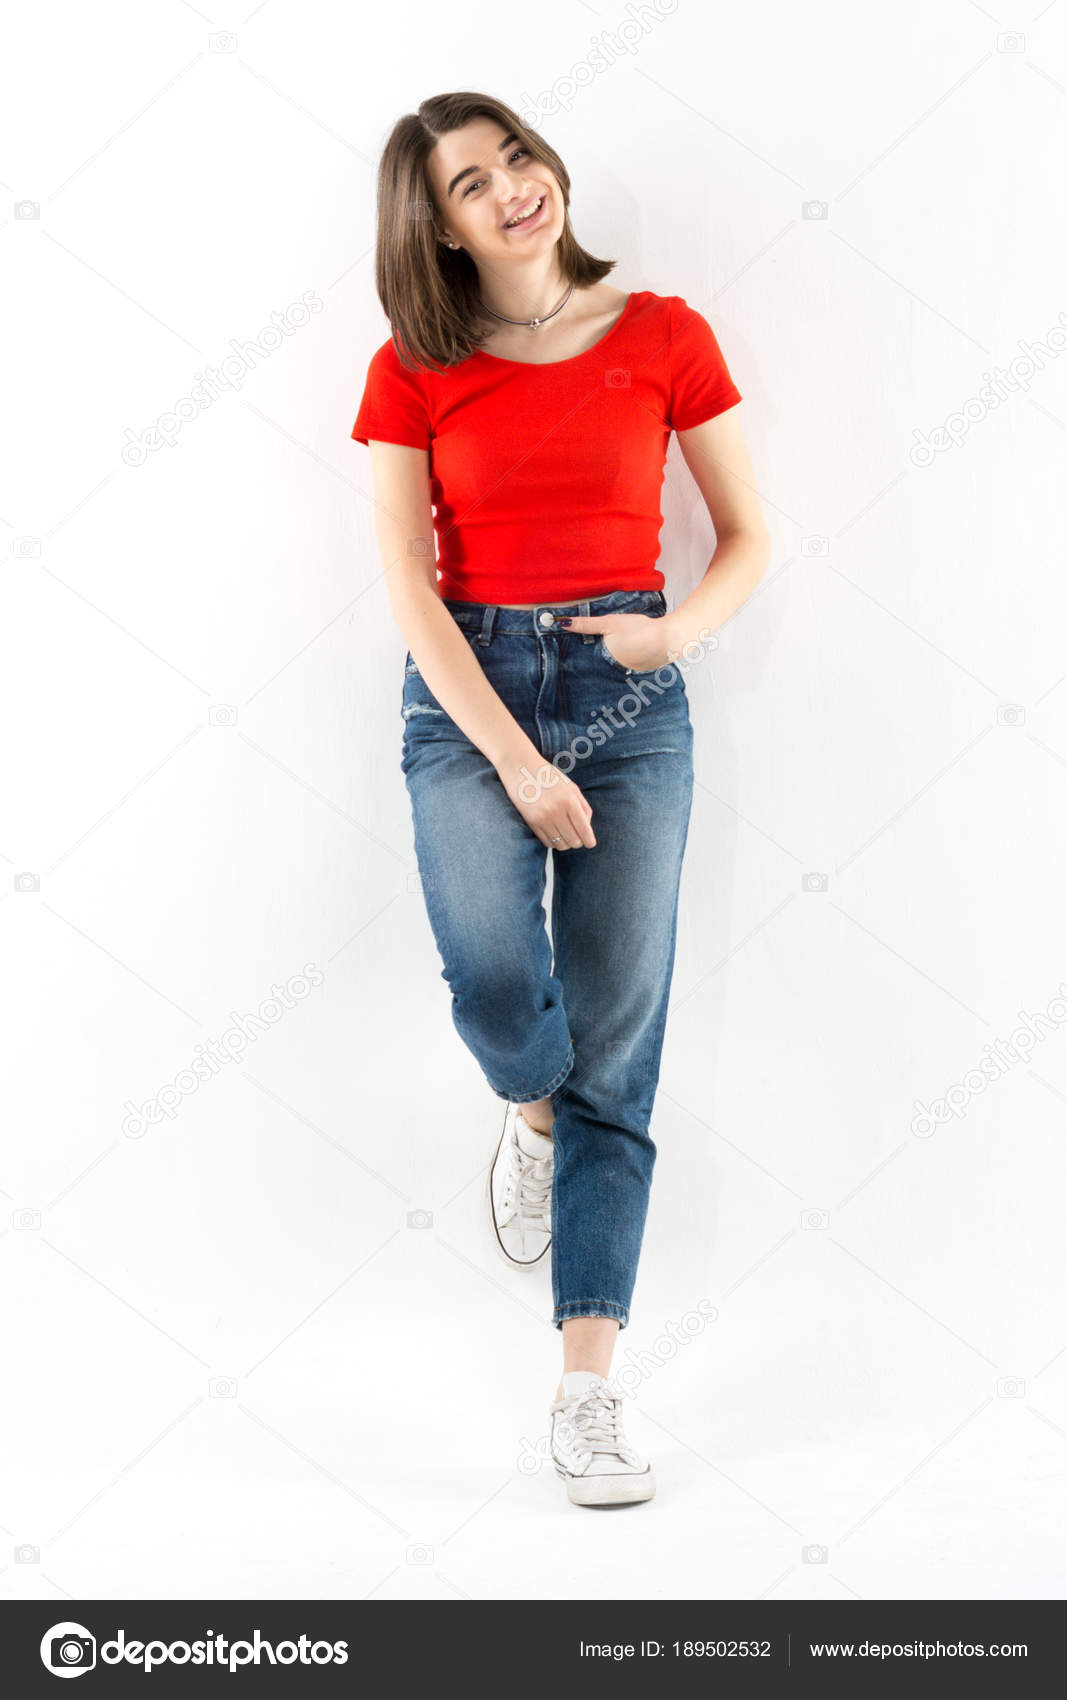 girl with red shirt